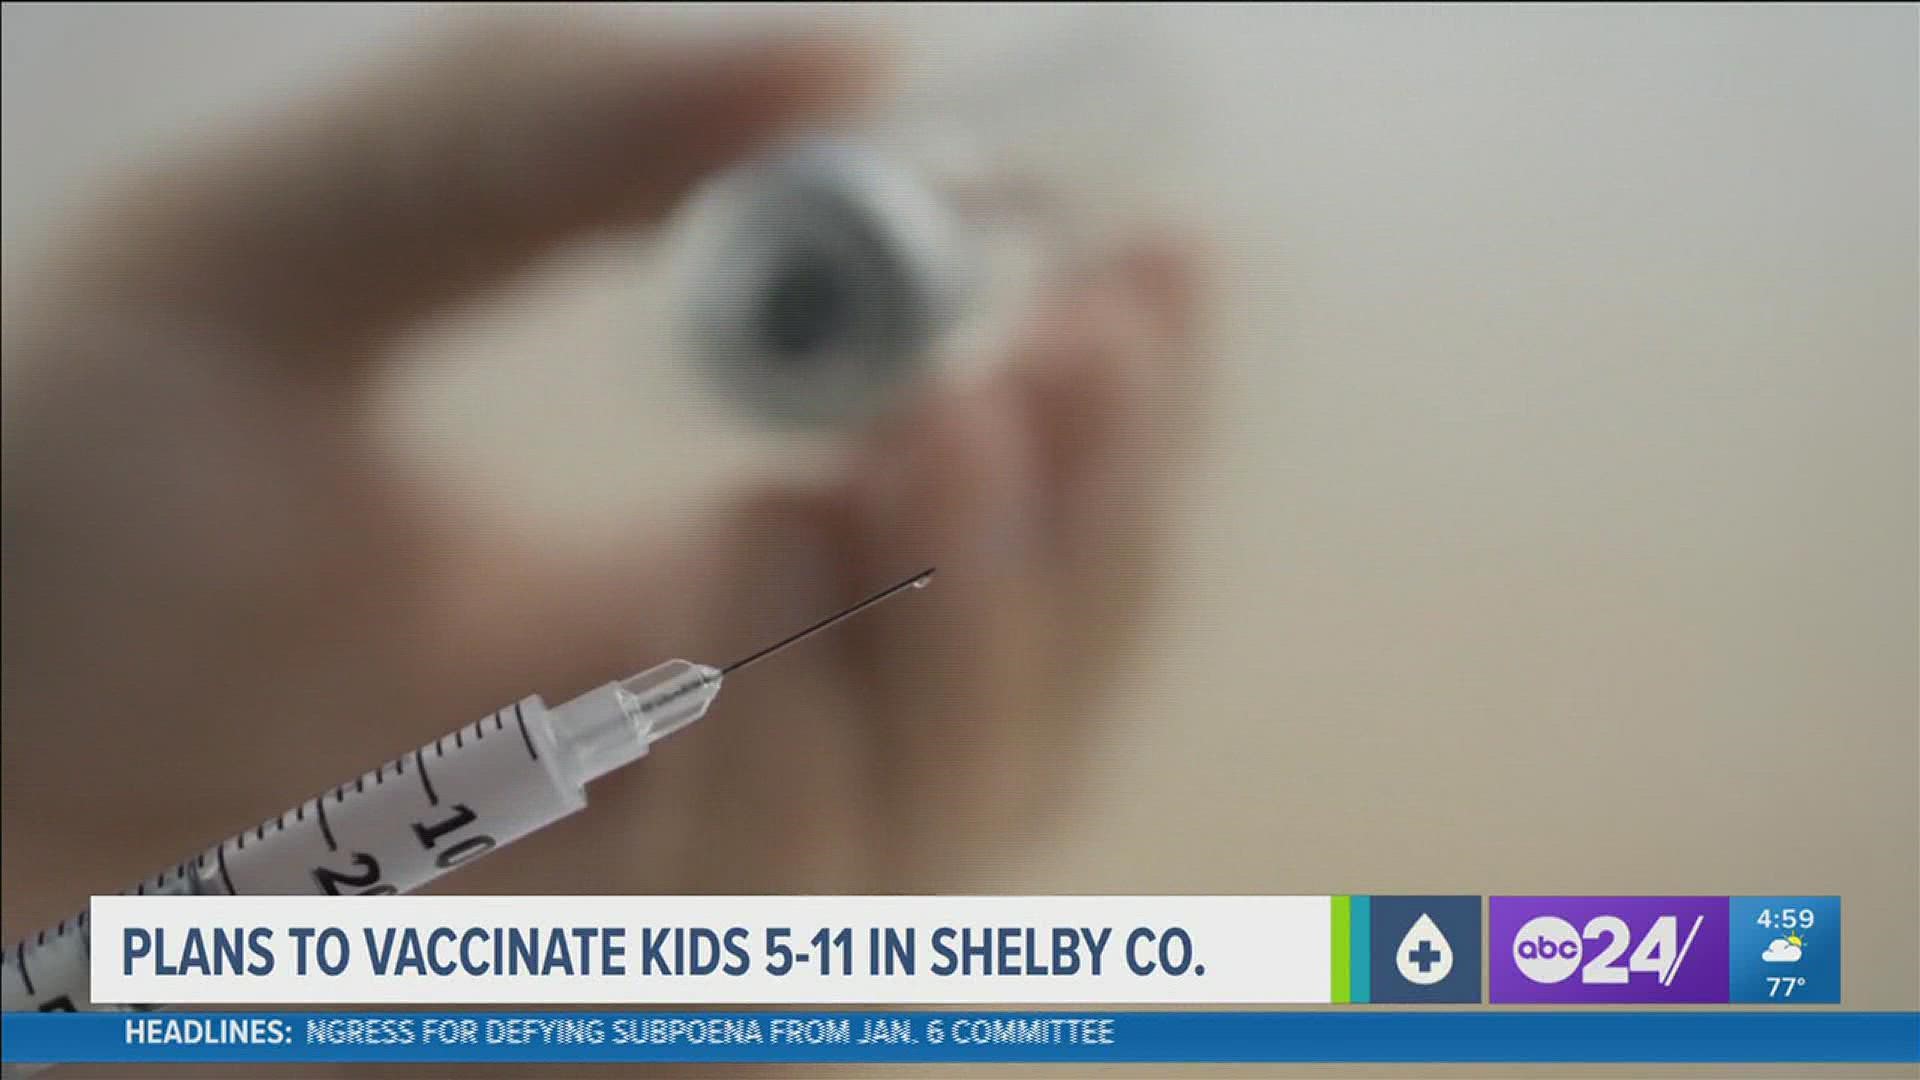 Plans are underway to begin children doses shortly after approval, likely next month. Health director hinted indoor mask mandates likely in place through holidays.